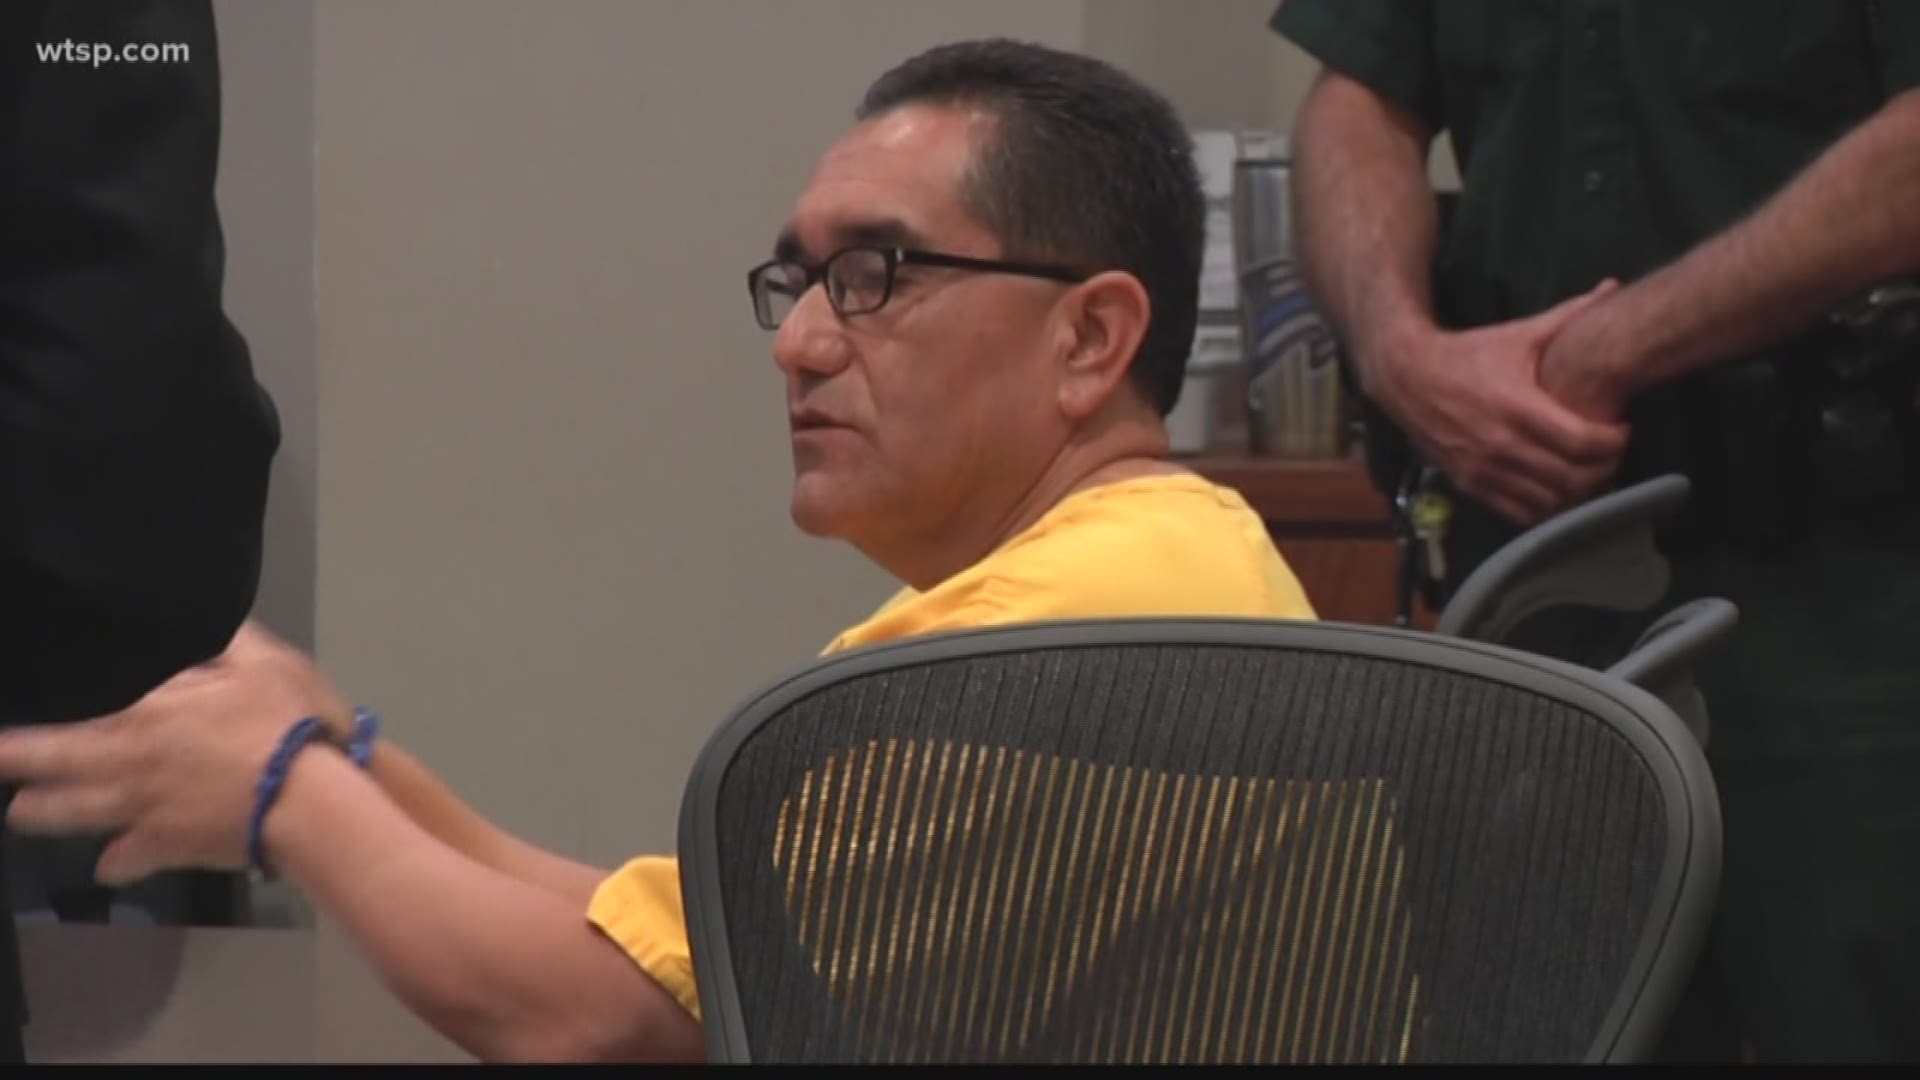 Danny Rocha asked a judge in a Sarasota courtroom to nix his life sentence handed down after he was convicted of taking part in a murder-for-hire plot that resulted in the killing of Sheila Bellush. The mother had quadruplet toddlers and two teenage daughters at the time of her murder back in November 1997.